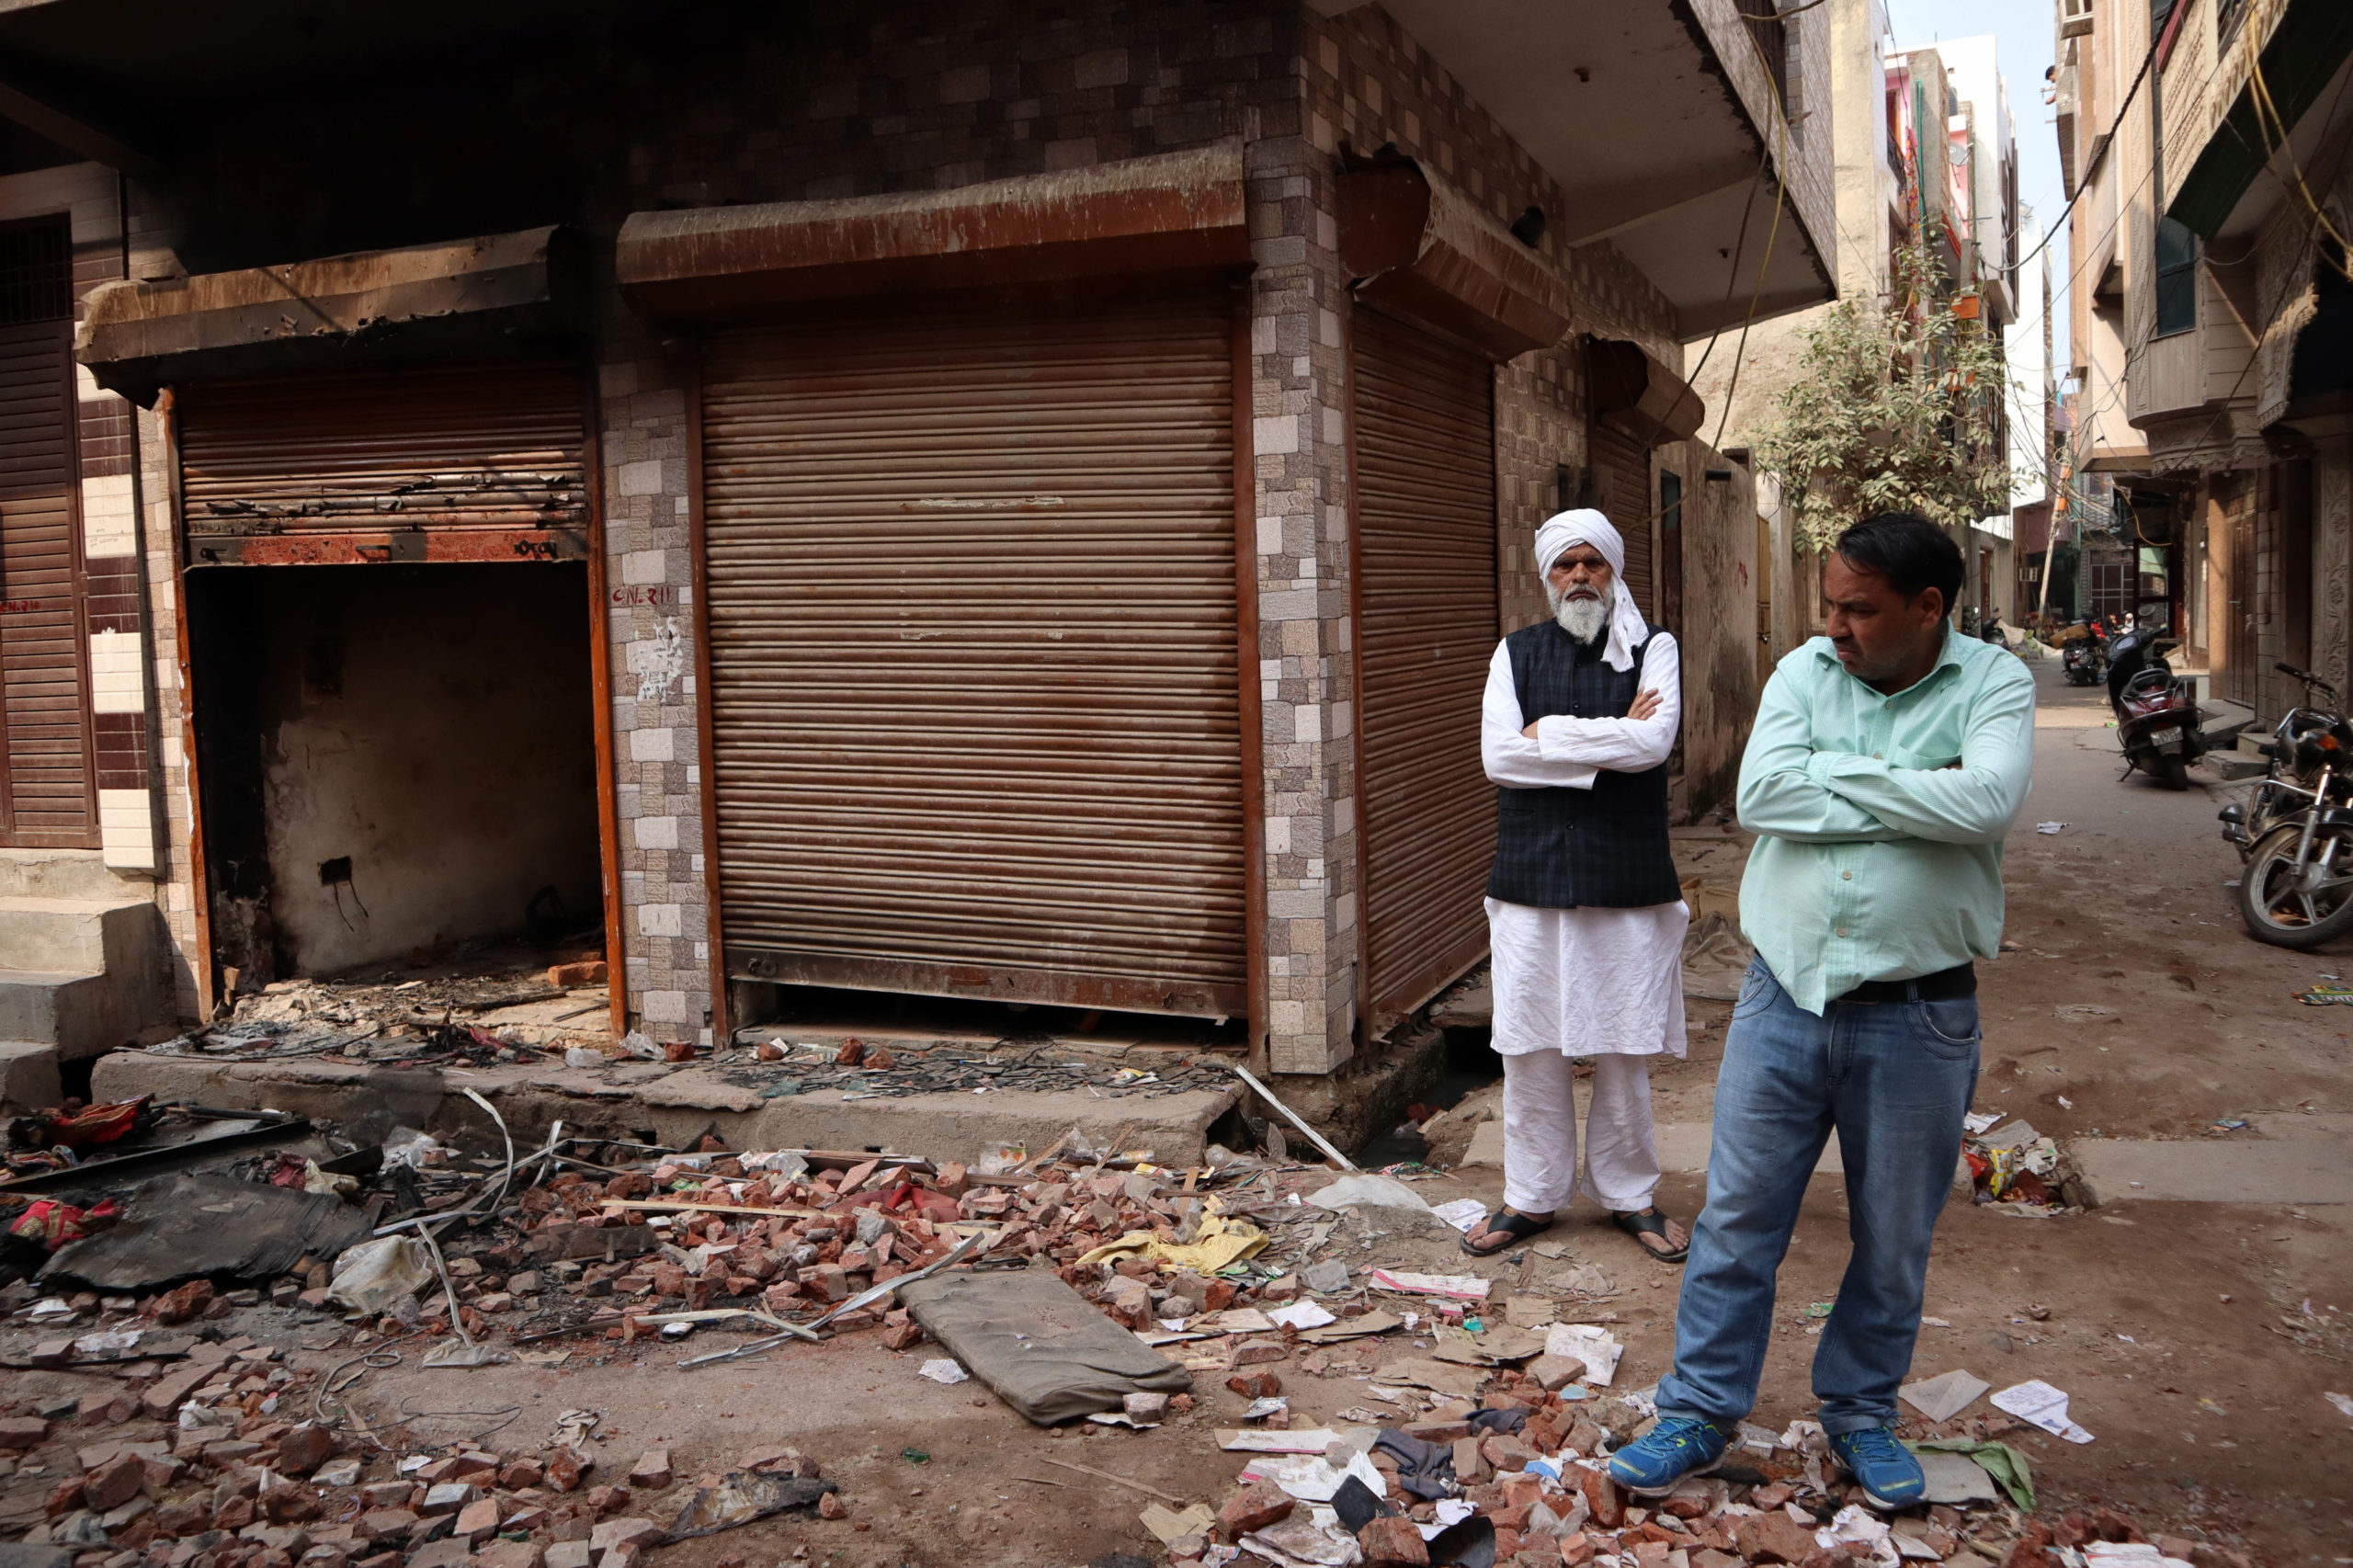 1,829 arrested, 755 FIRs lodged: Govt on northeast Delhi riots